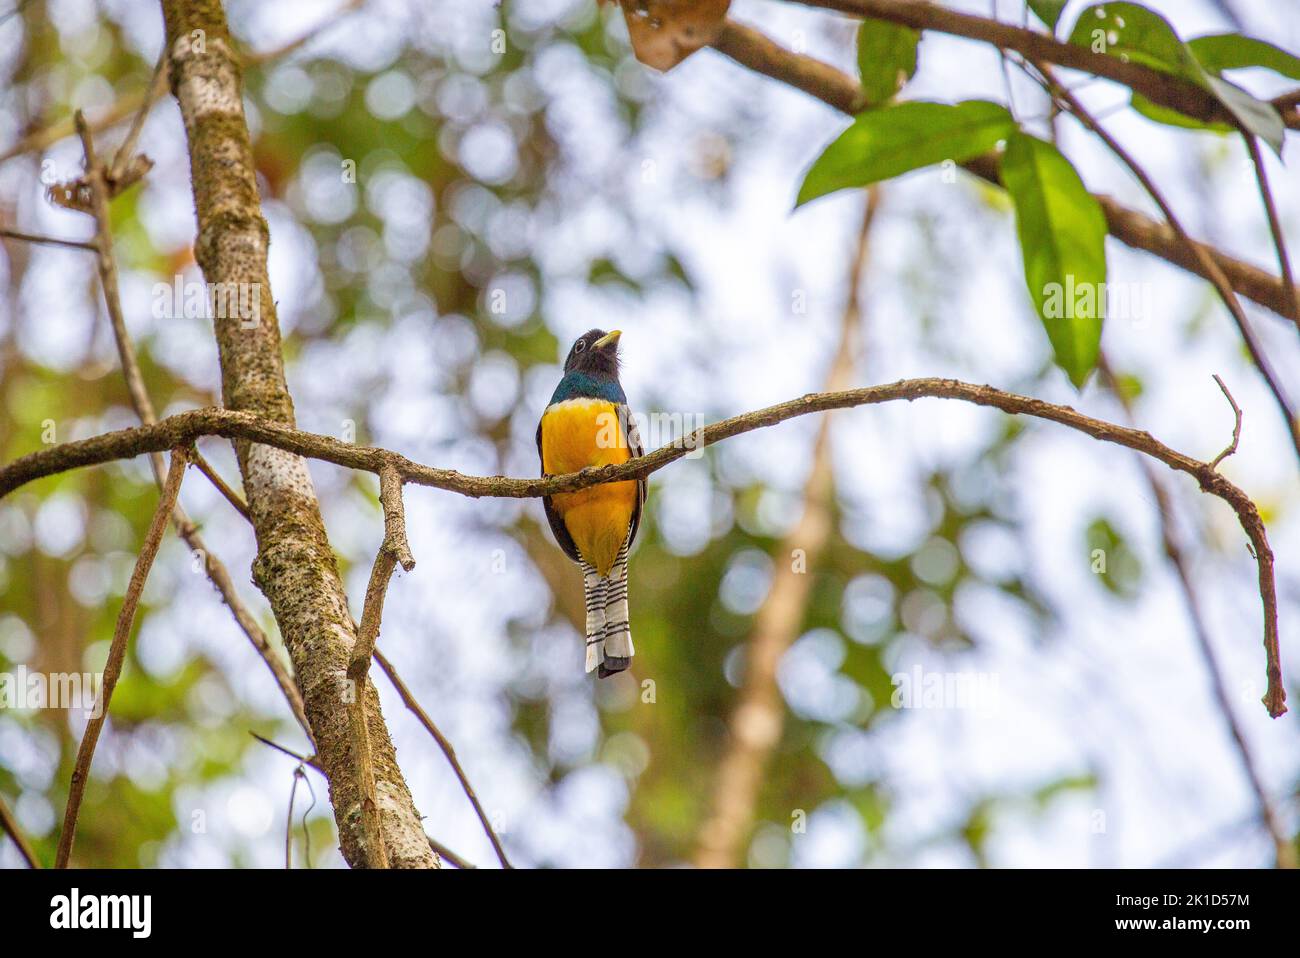 On the Osa Peninsula in Costa Rica. A beautiful yellow blue gartered trogon bird is resting high above on a branch in the tree. Stock Photo